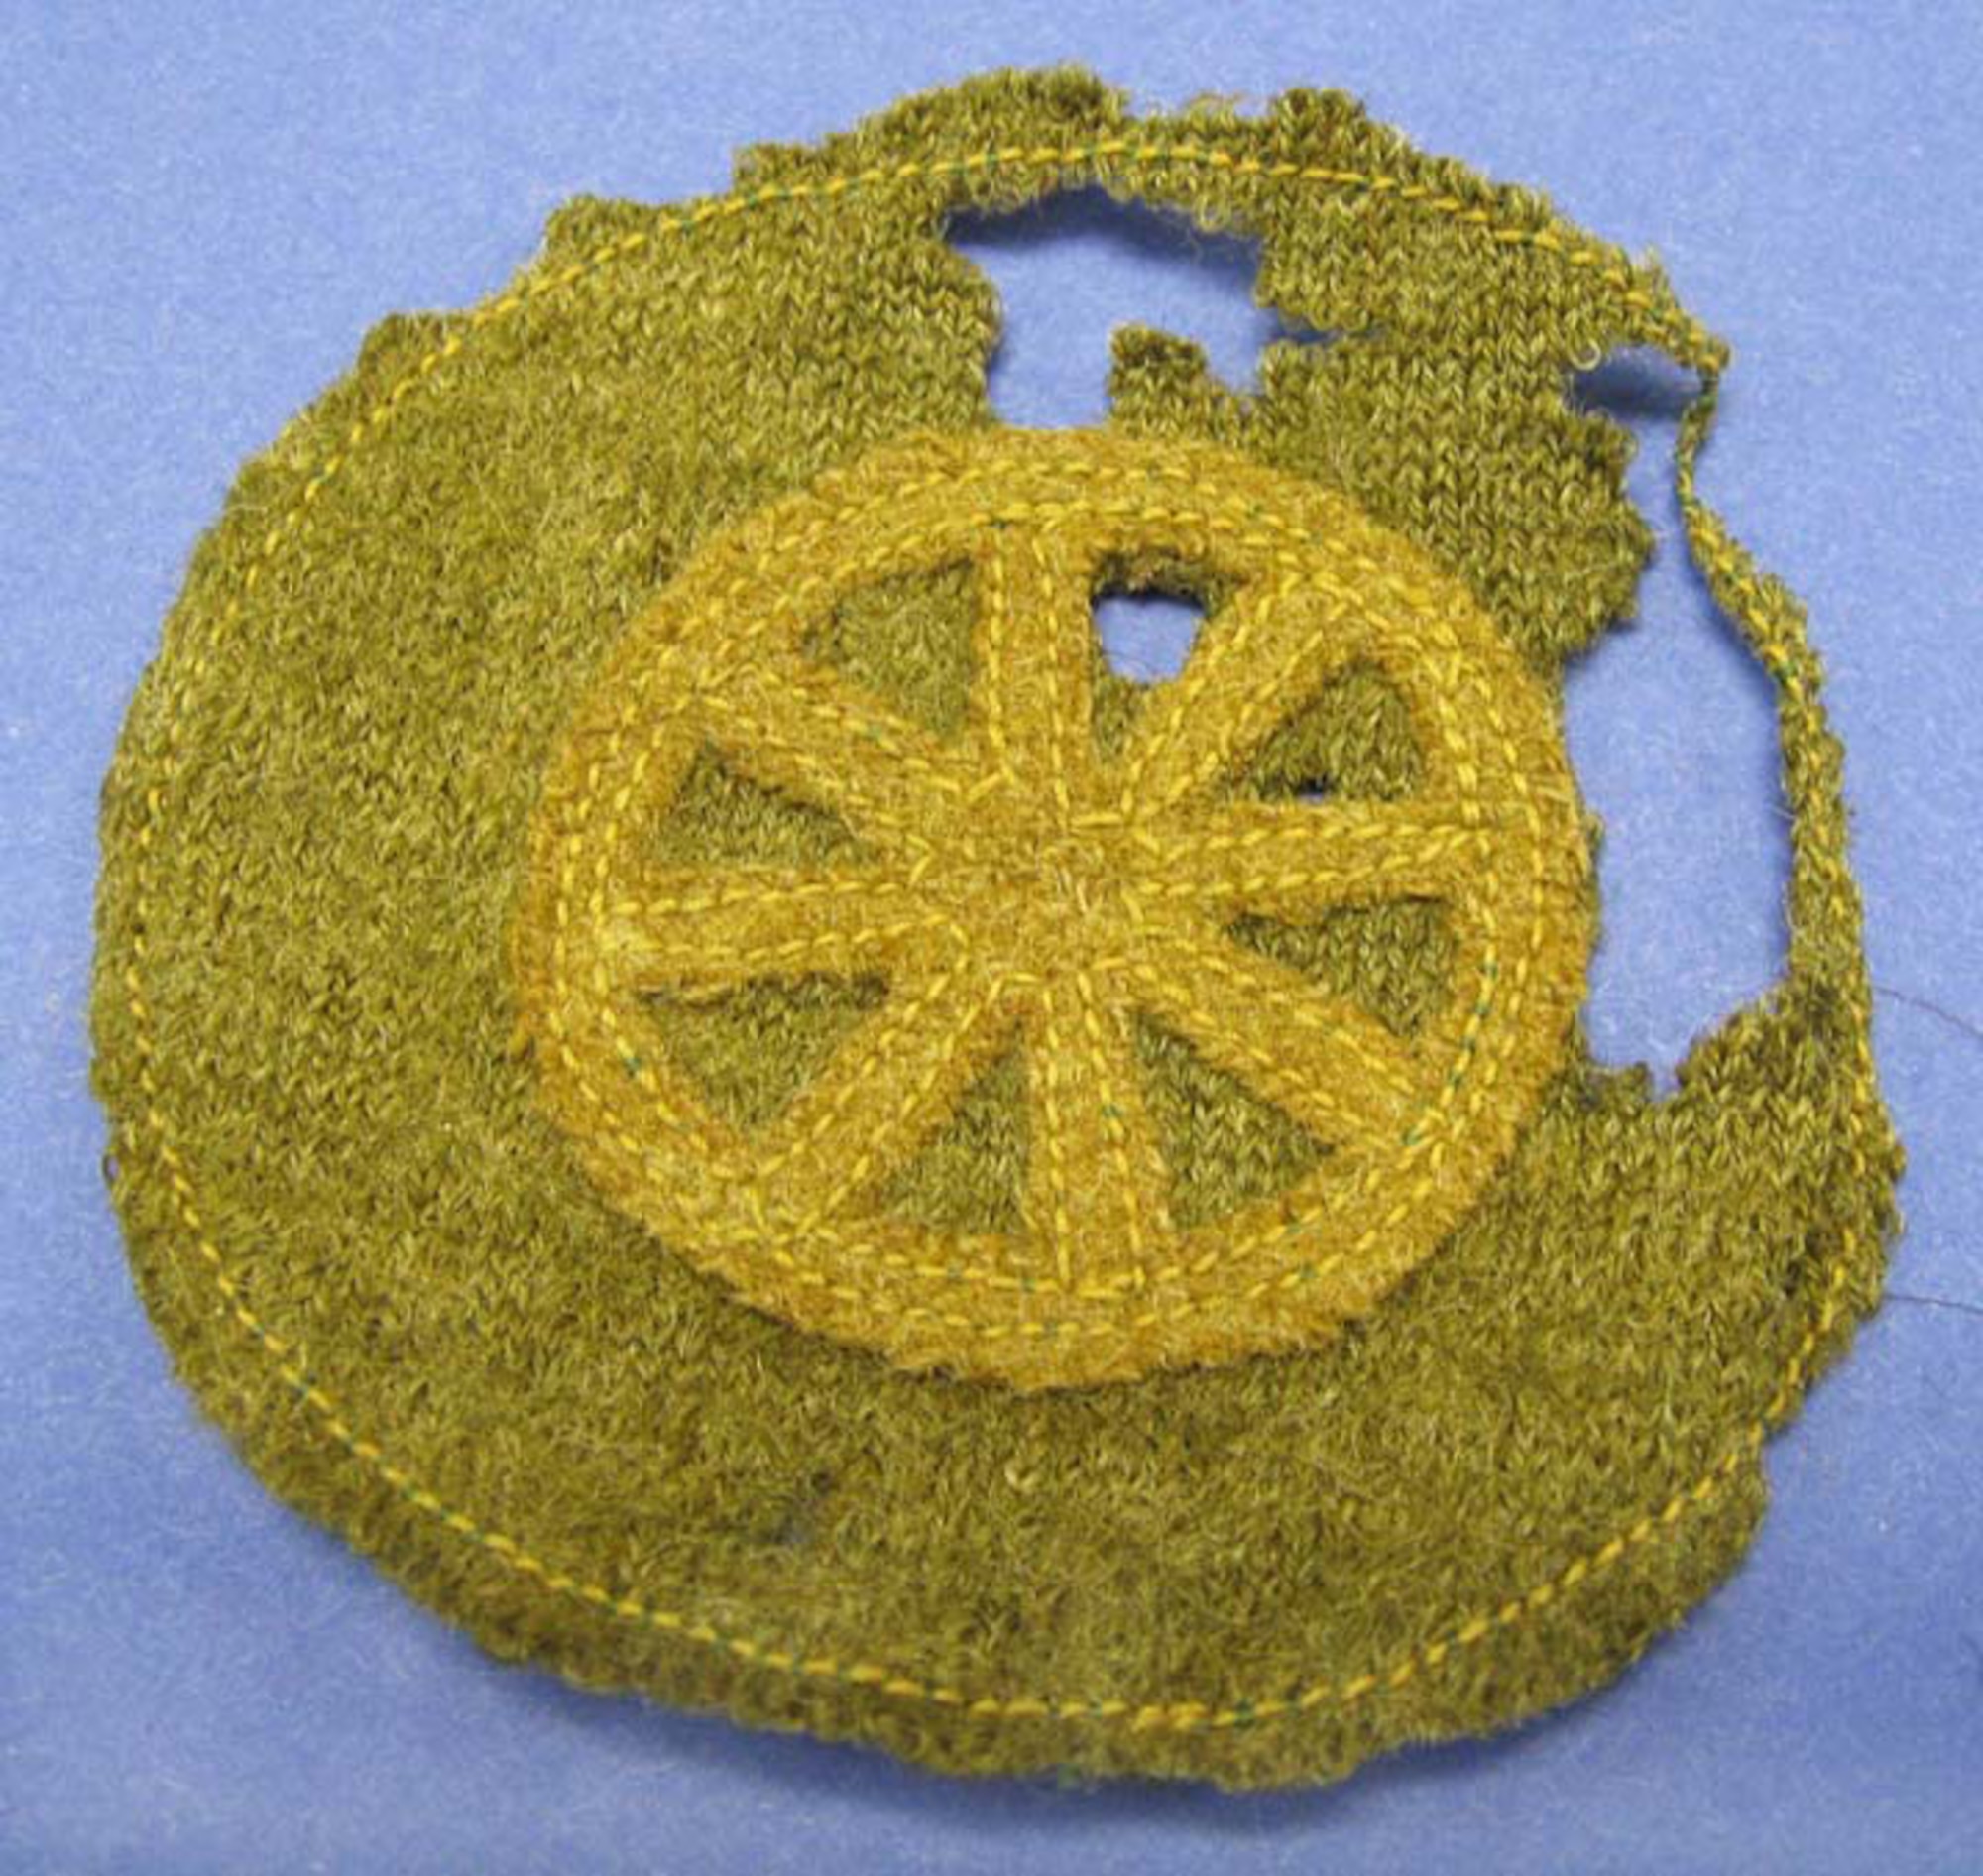 According to the donor, this item comes from Lt. Gareth Williams. It was worn on the lower forearm sleeve indicating "Wagoner." This badge appears to be from the 1917-1918 period. (U.S. Air Force photo)